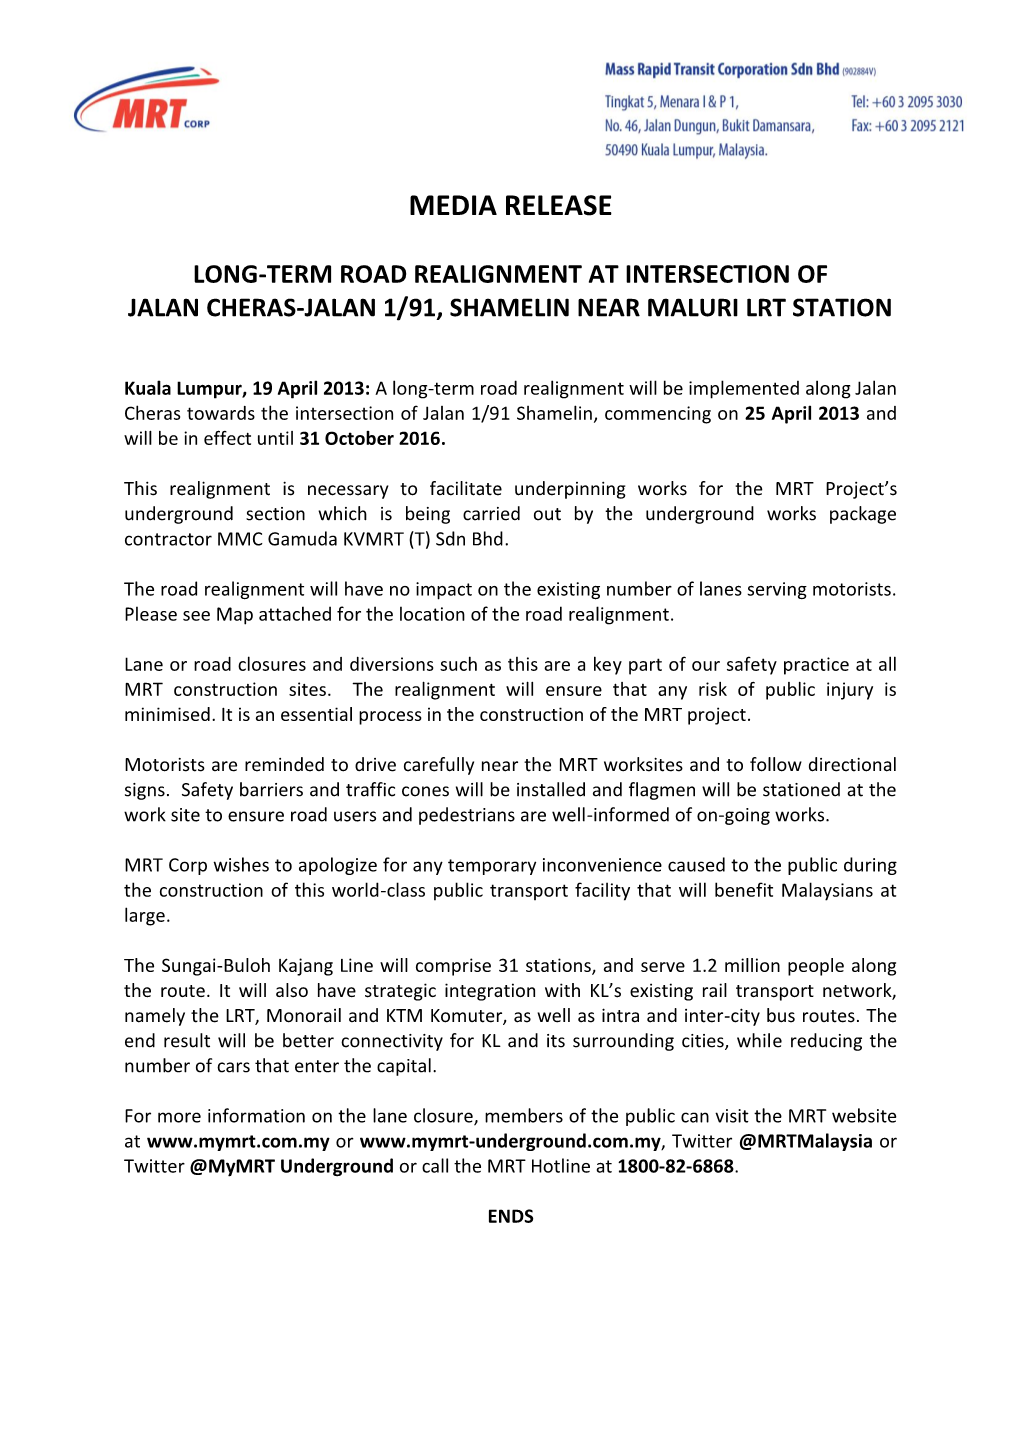 Media Release Long-Term Road Realignment At